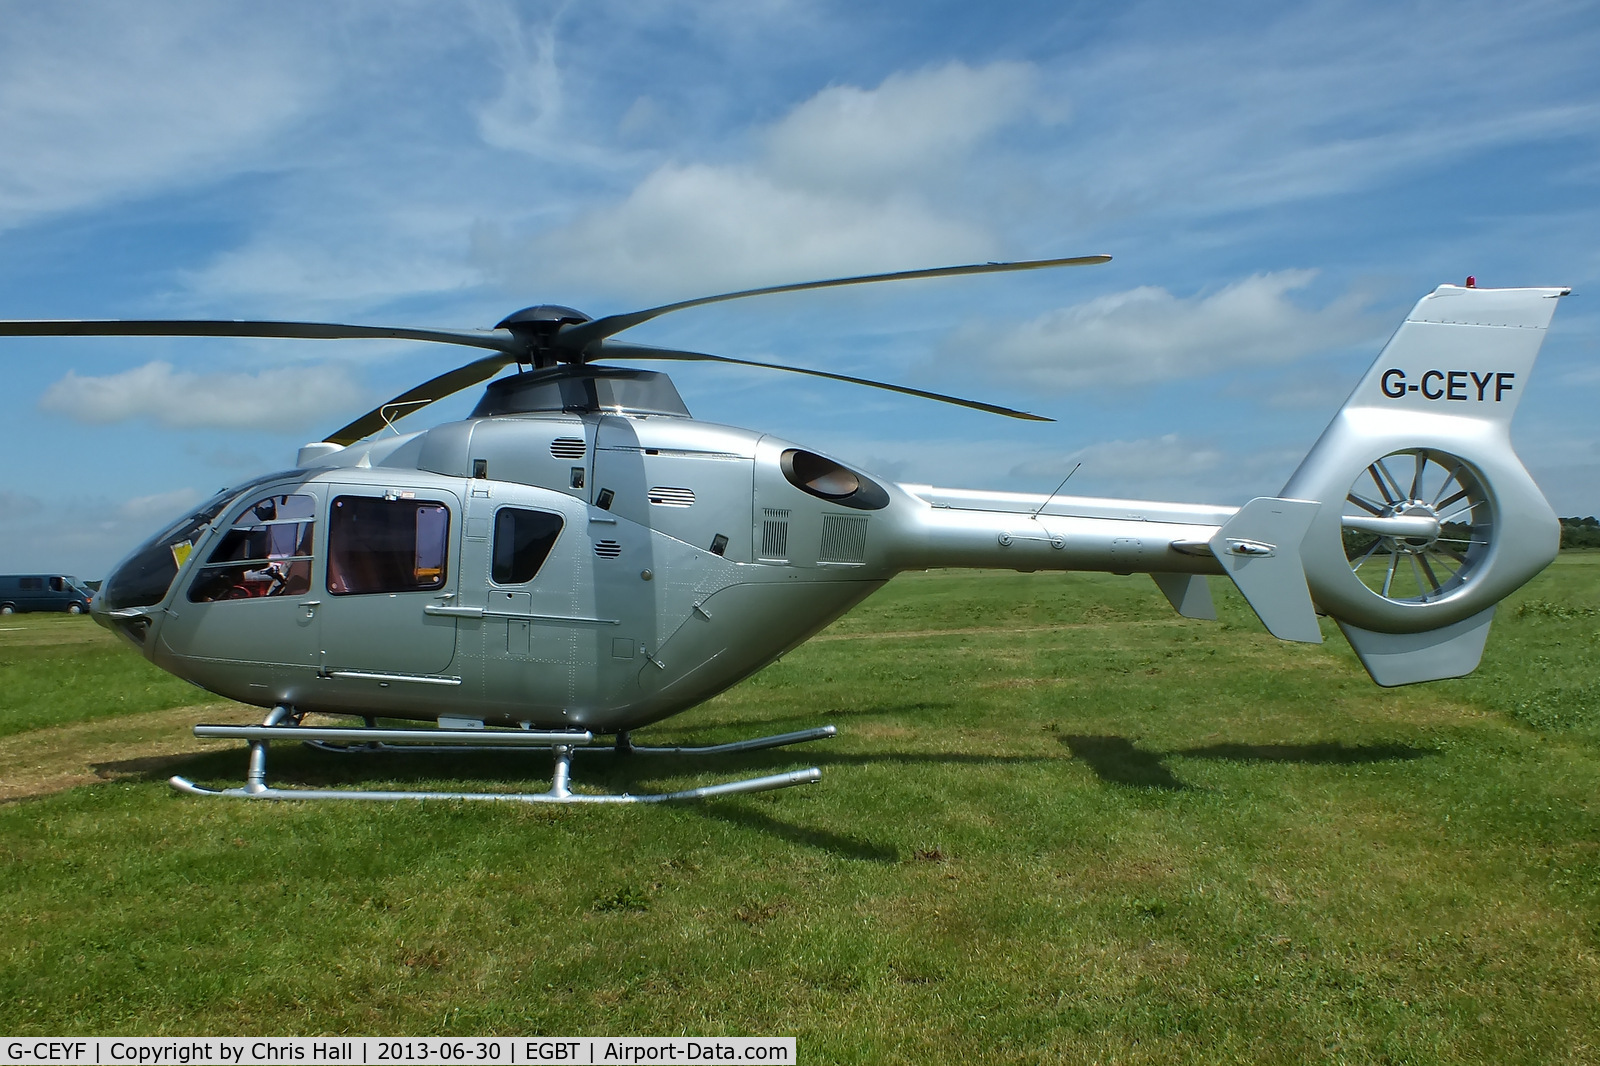 G-CEYF, 1999 Eurocopter EC-135T-1 C/N 0115, being used for ferrying race fans to the British F1 Grand Prix at Silverstone